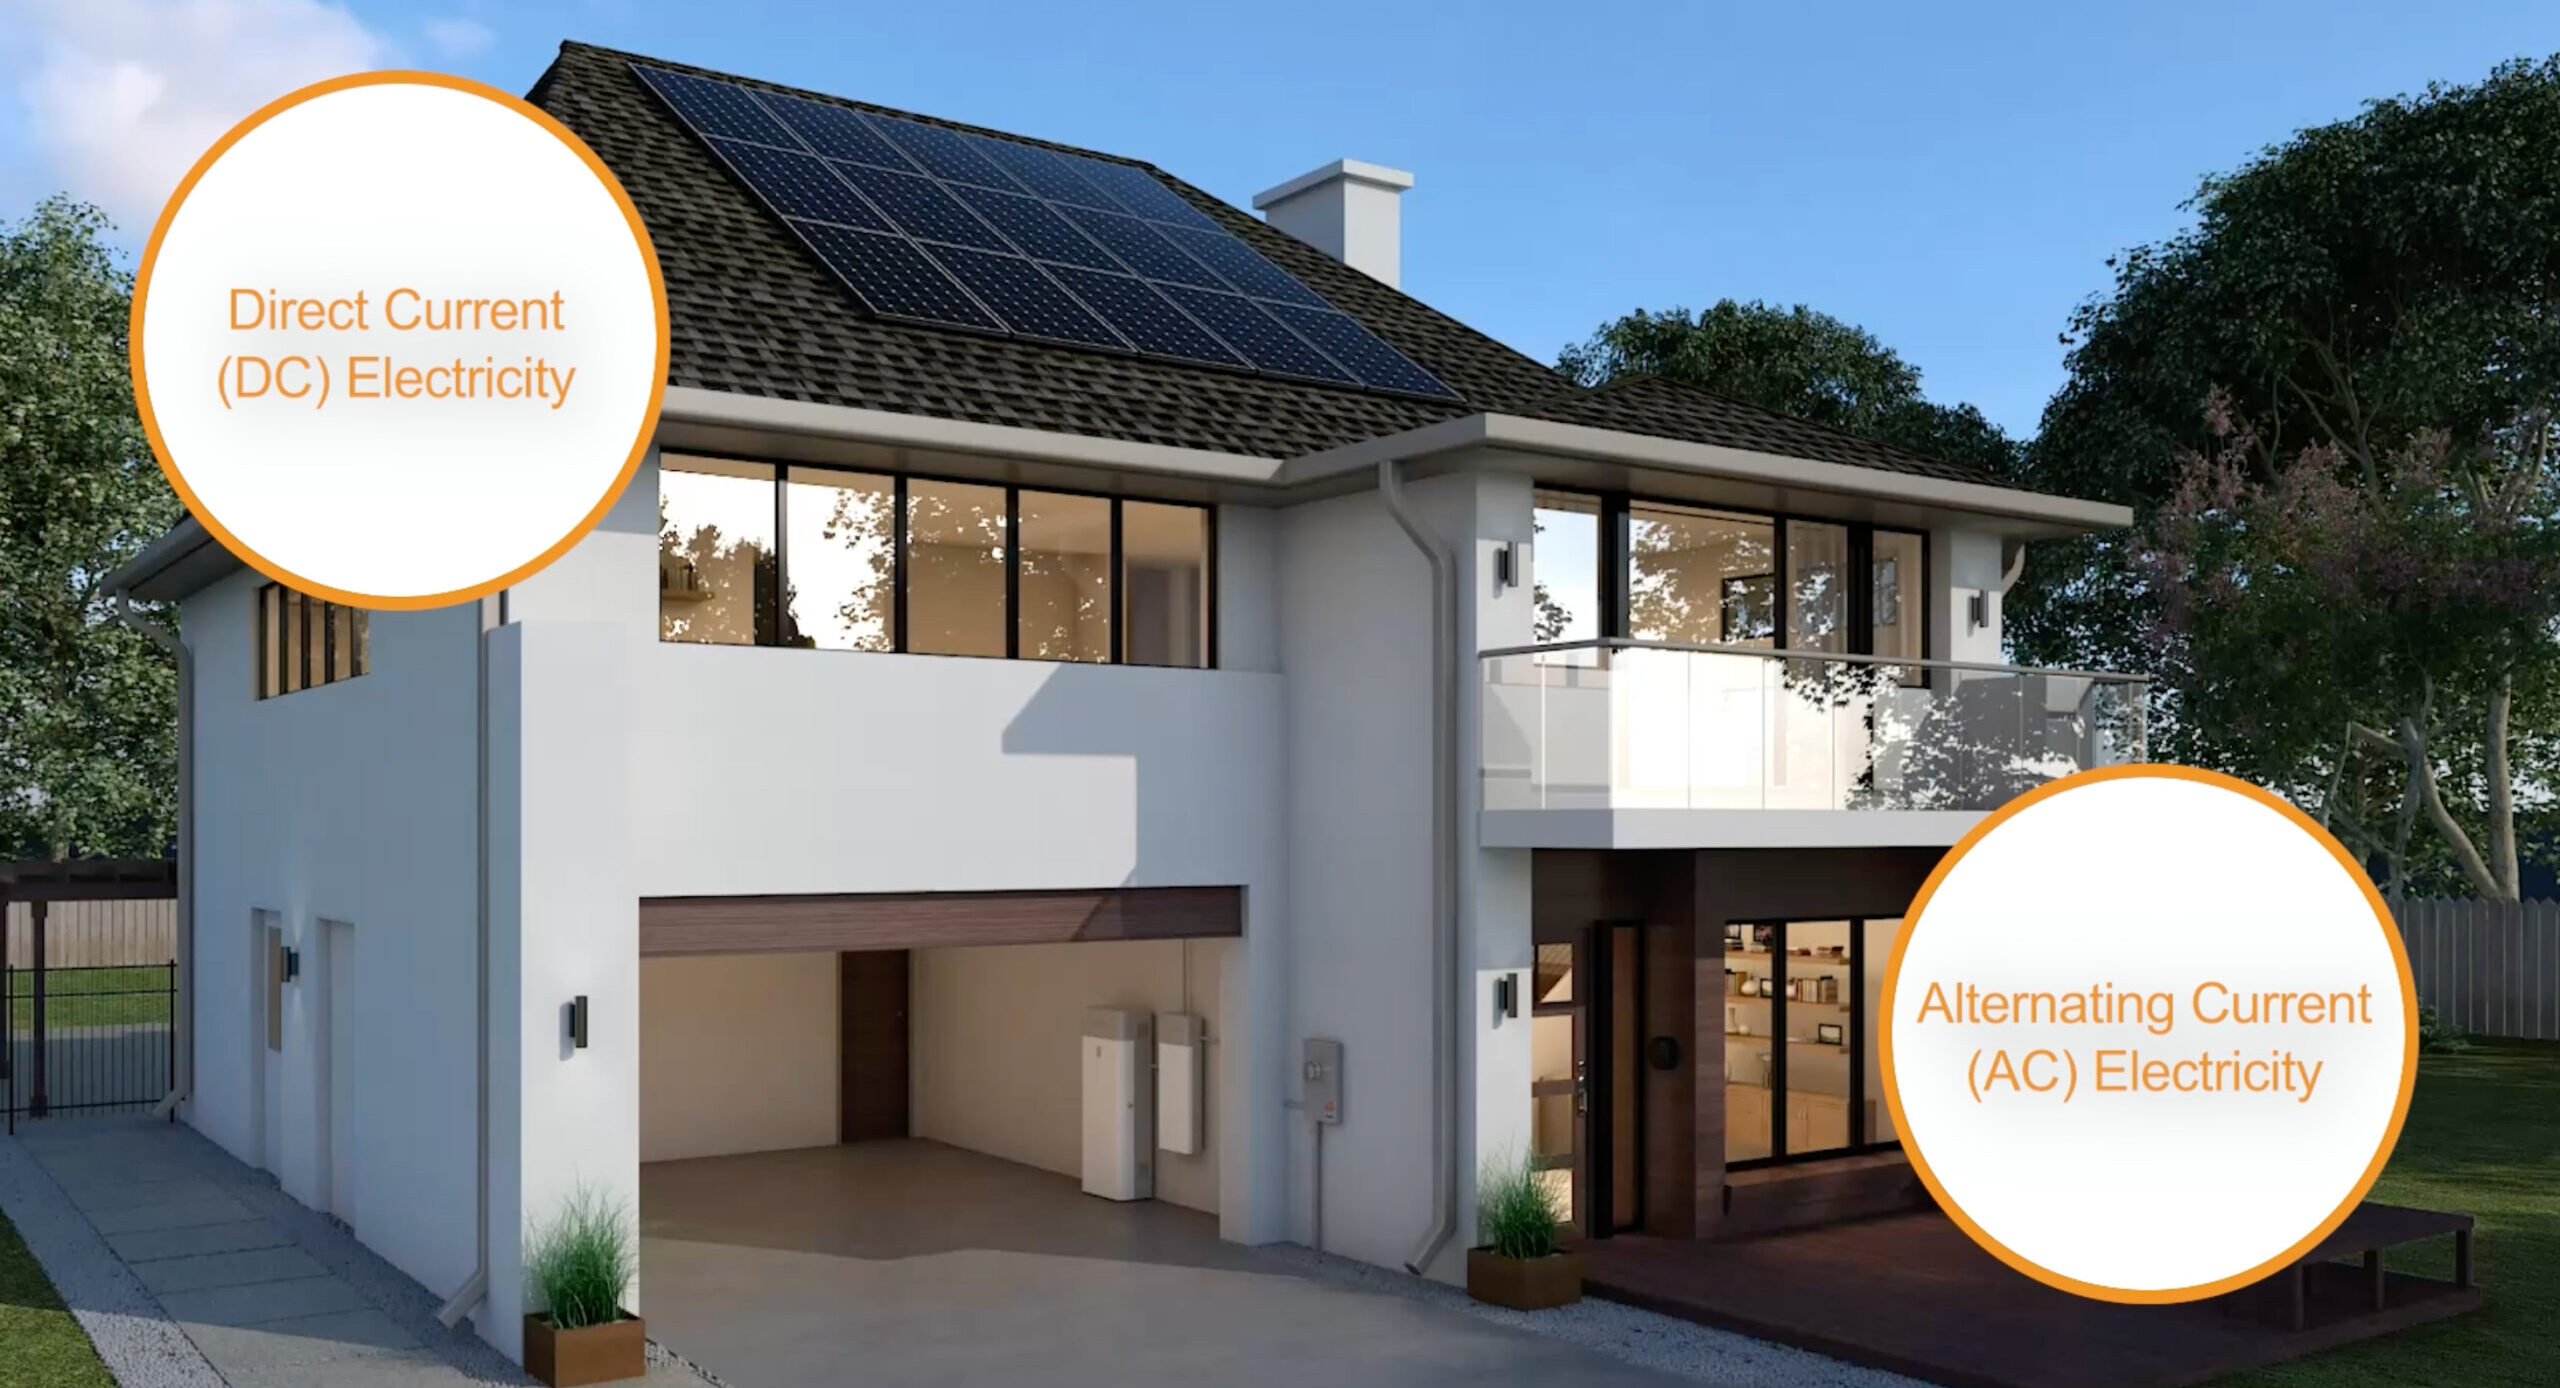 A house with solar panels on the roof and an orange sign above it.